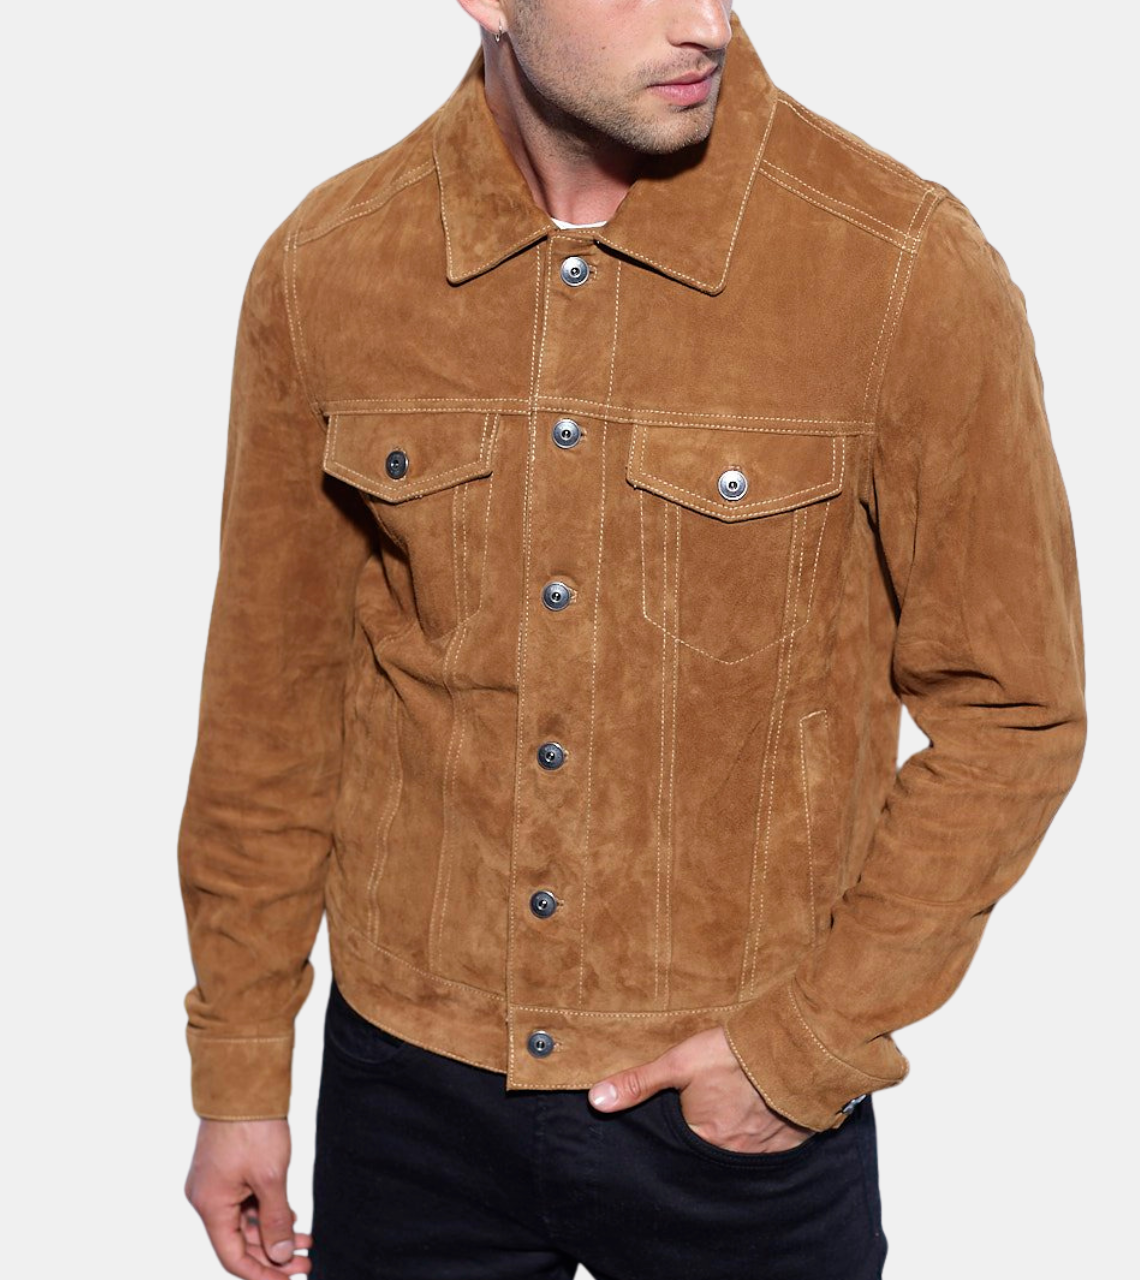  Brown Suede Leather Jacket